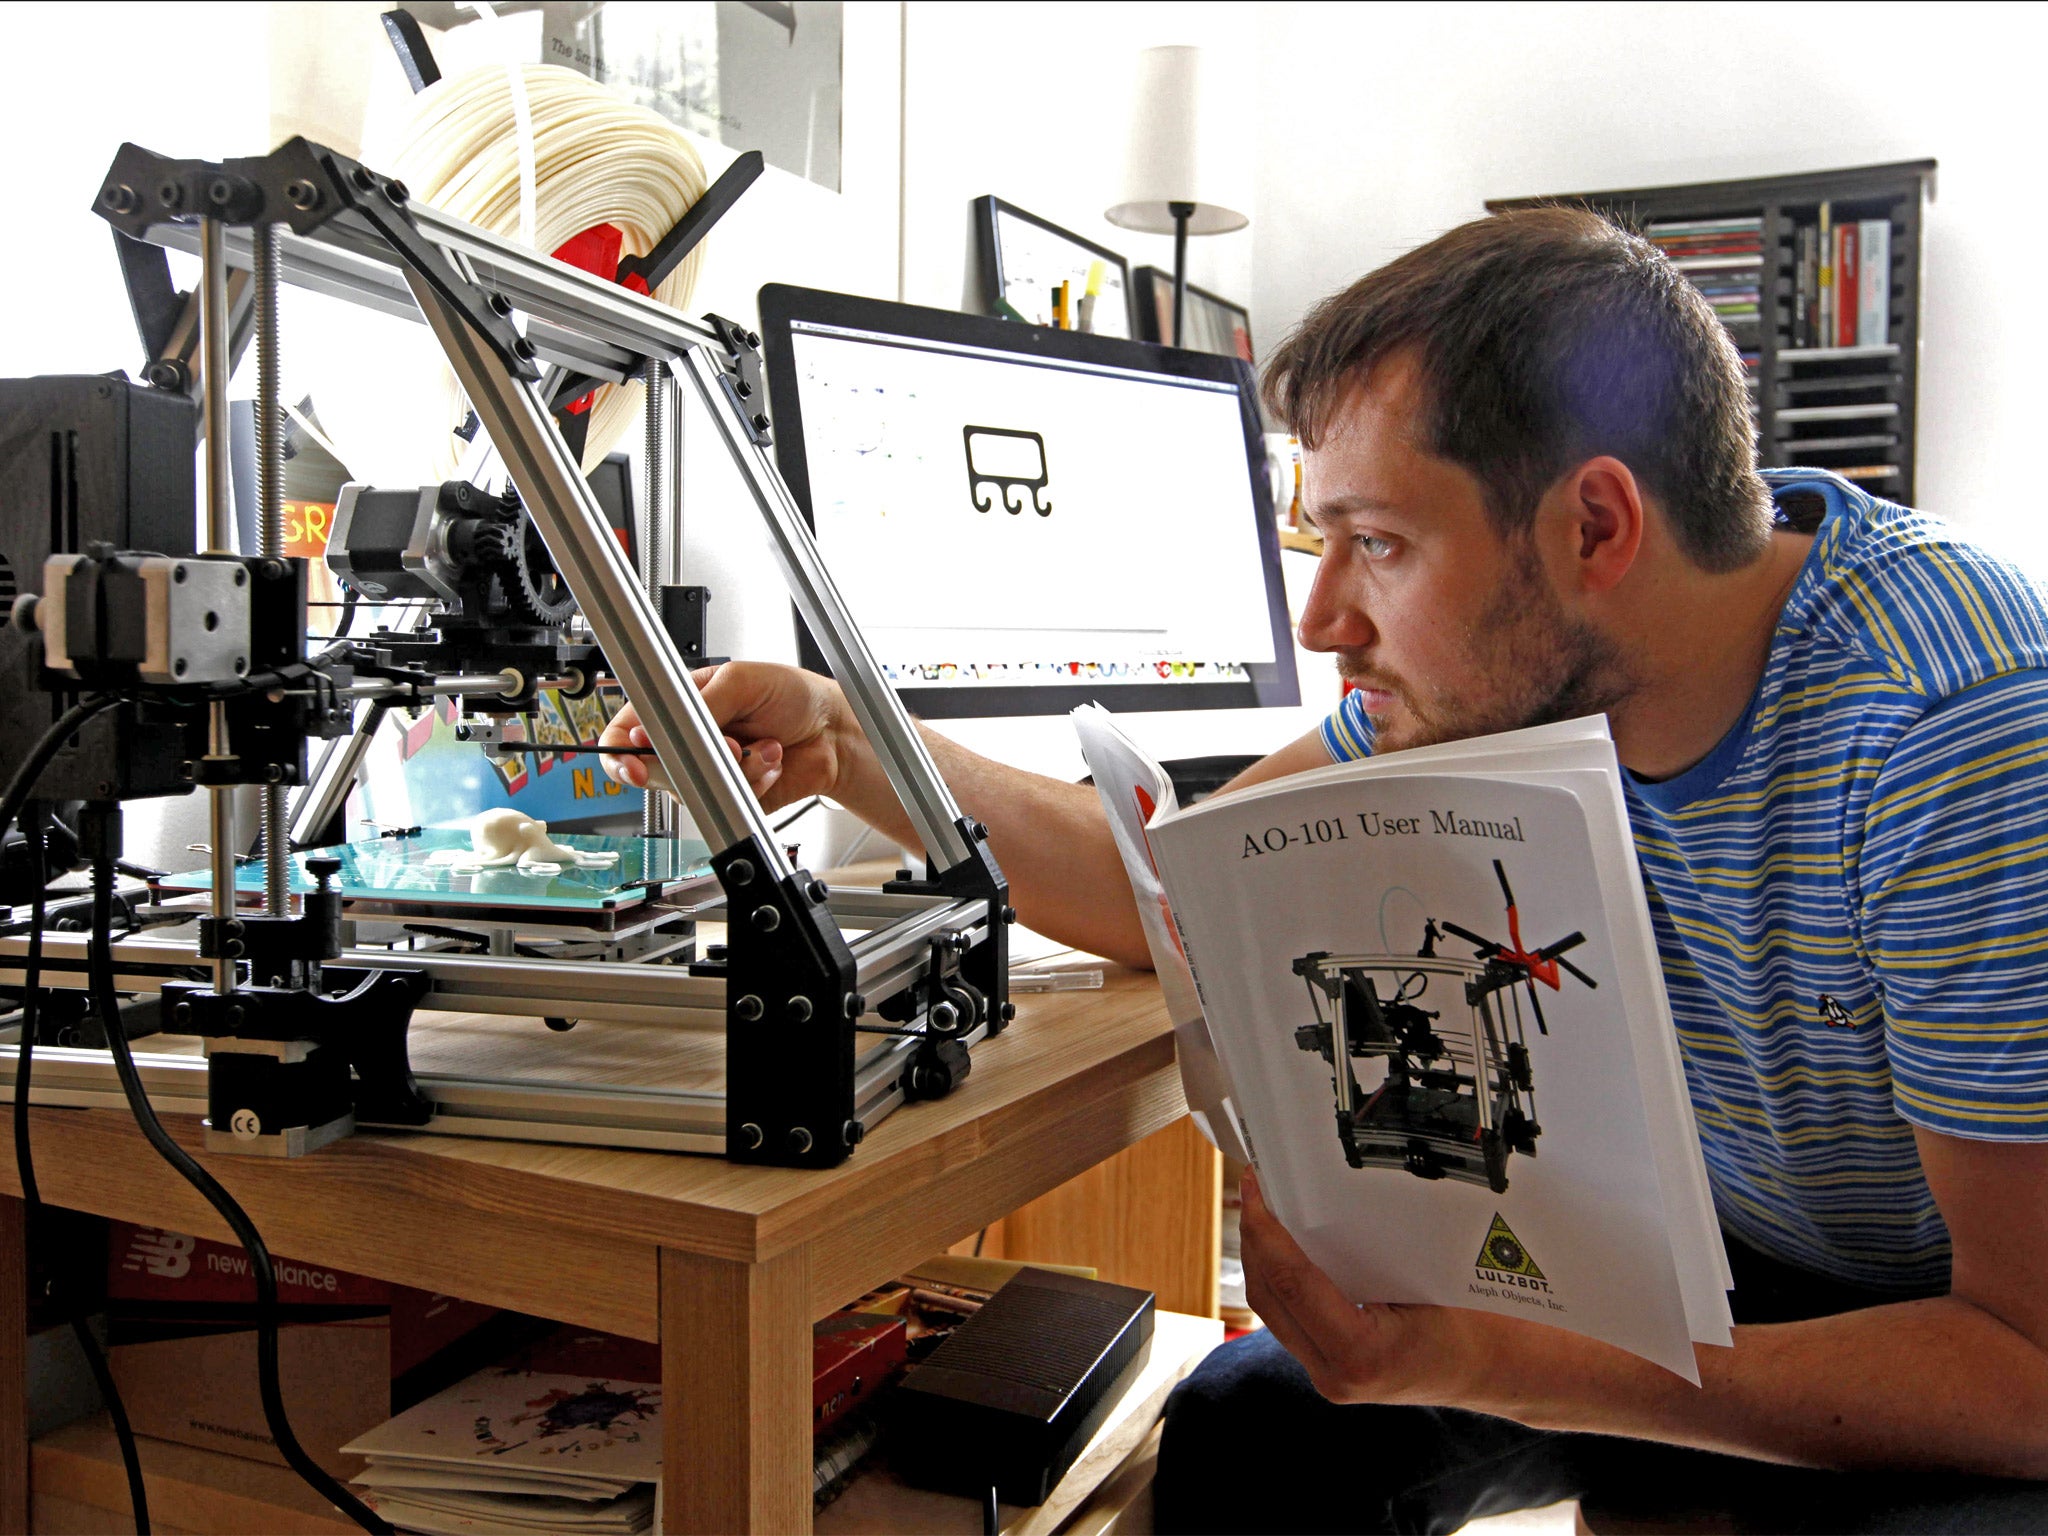 Home-baked idea: Will Dean struggles to get to grips with the Lulzbot 3D printer